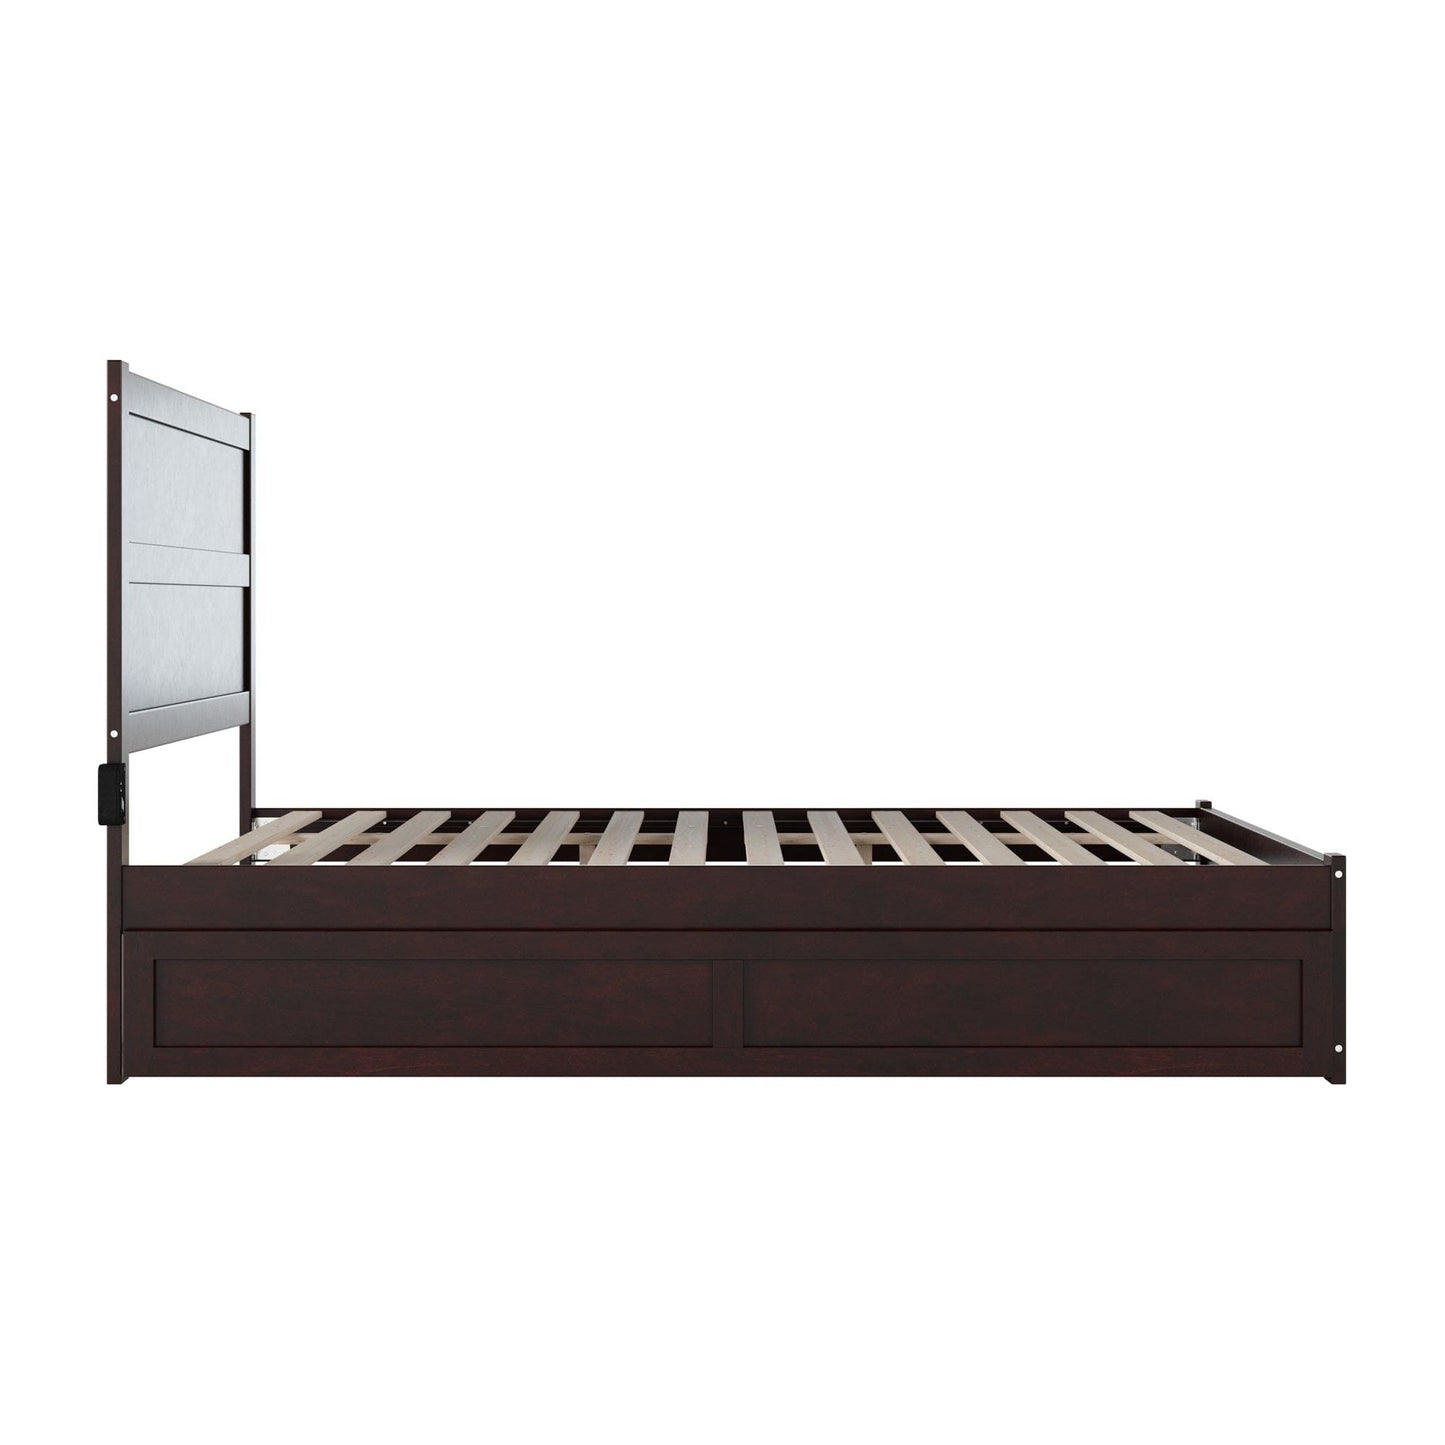 AFI Furnishings NoHo Queen Bed with Footboard and Twin Extra Long Trundle in Espresso AG9161141